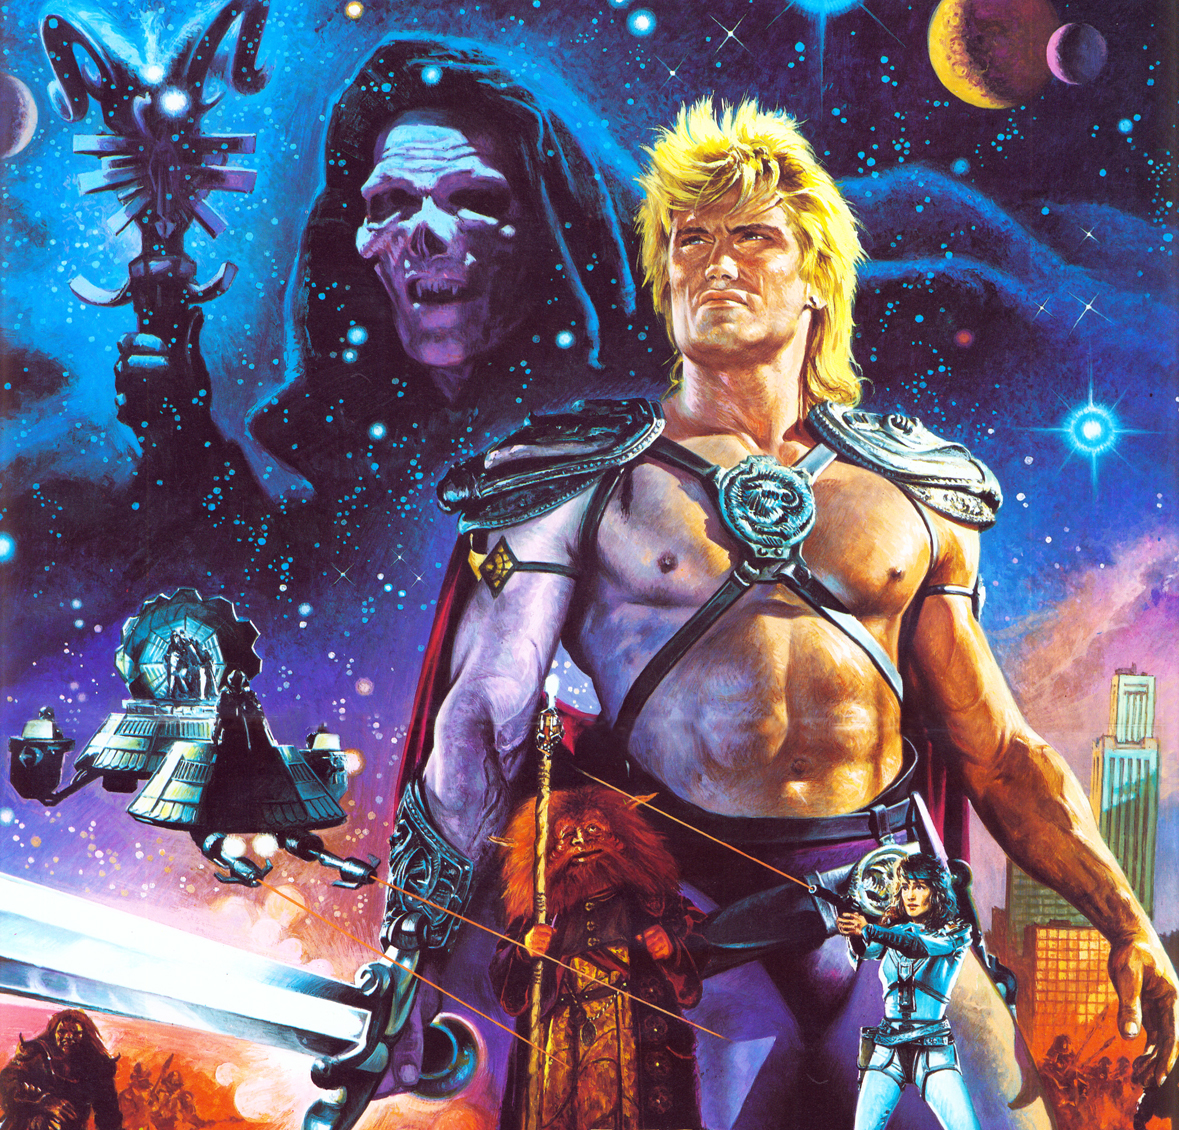 12. ElectricBoogaloo_Still_Archive_Masters of the Universe.jpg